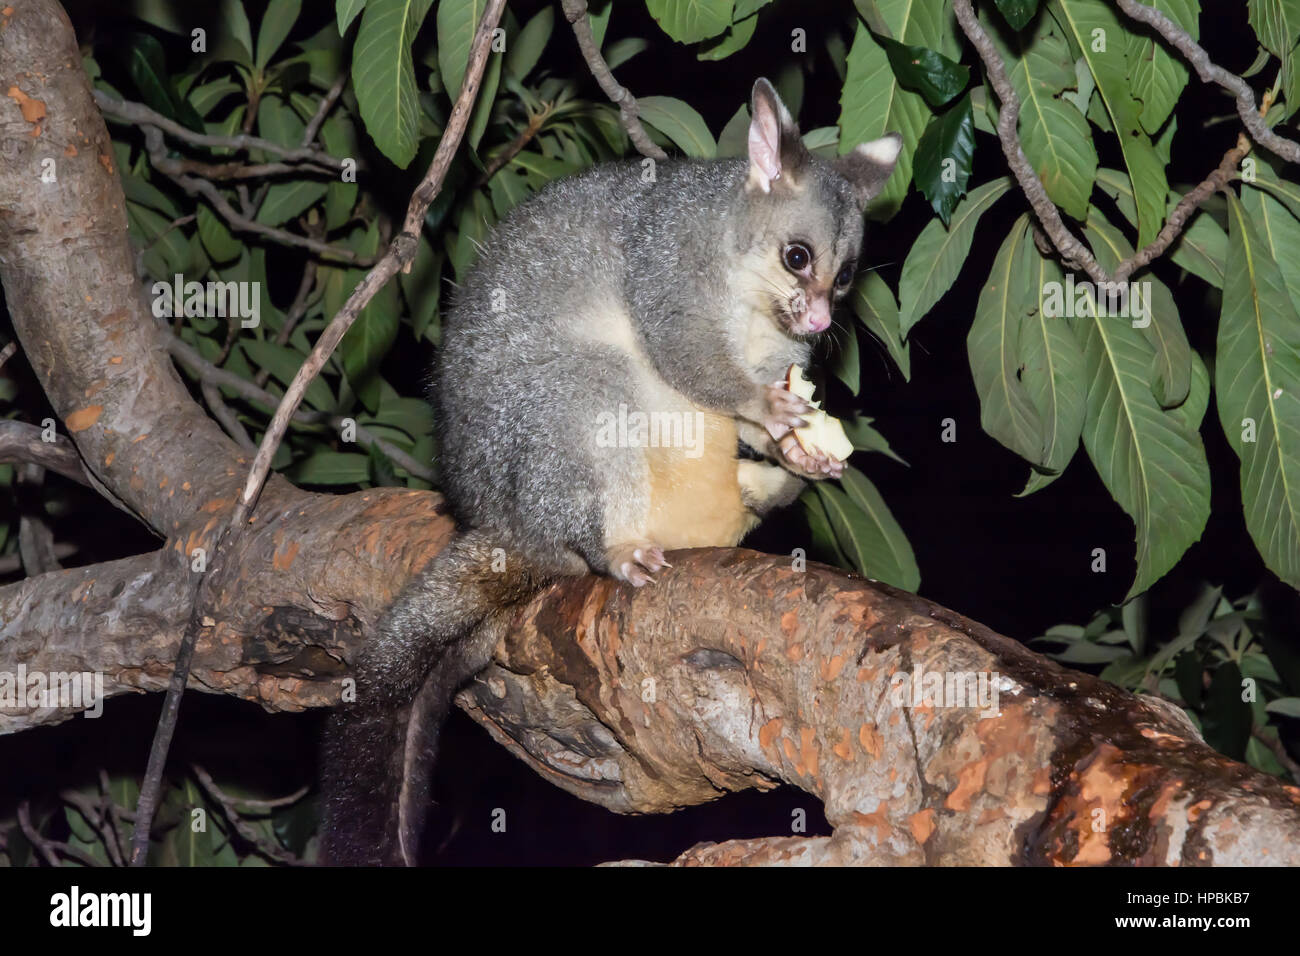 Common Brushtail Possum (Trichosurus vulpecula) eating a slice of apple  in a loquat tree at night Stock Photo